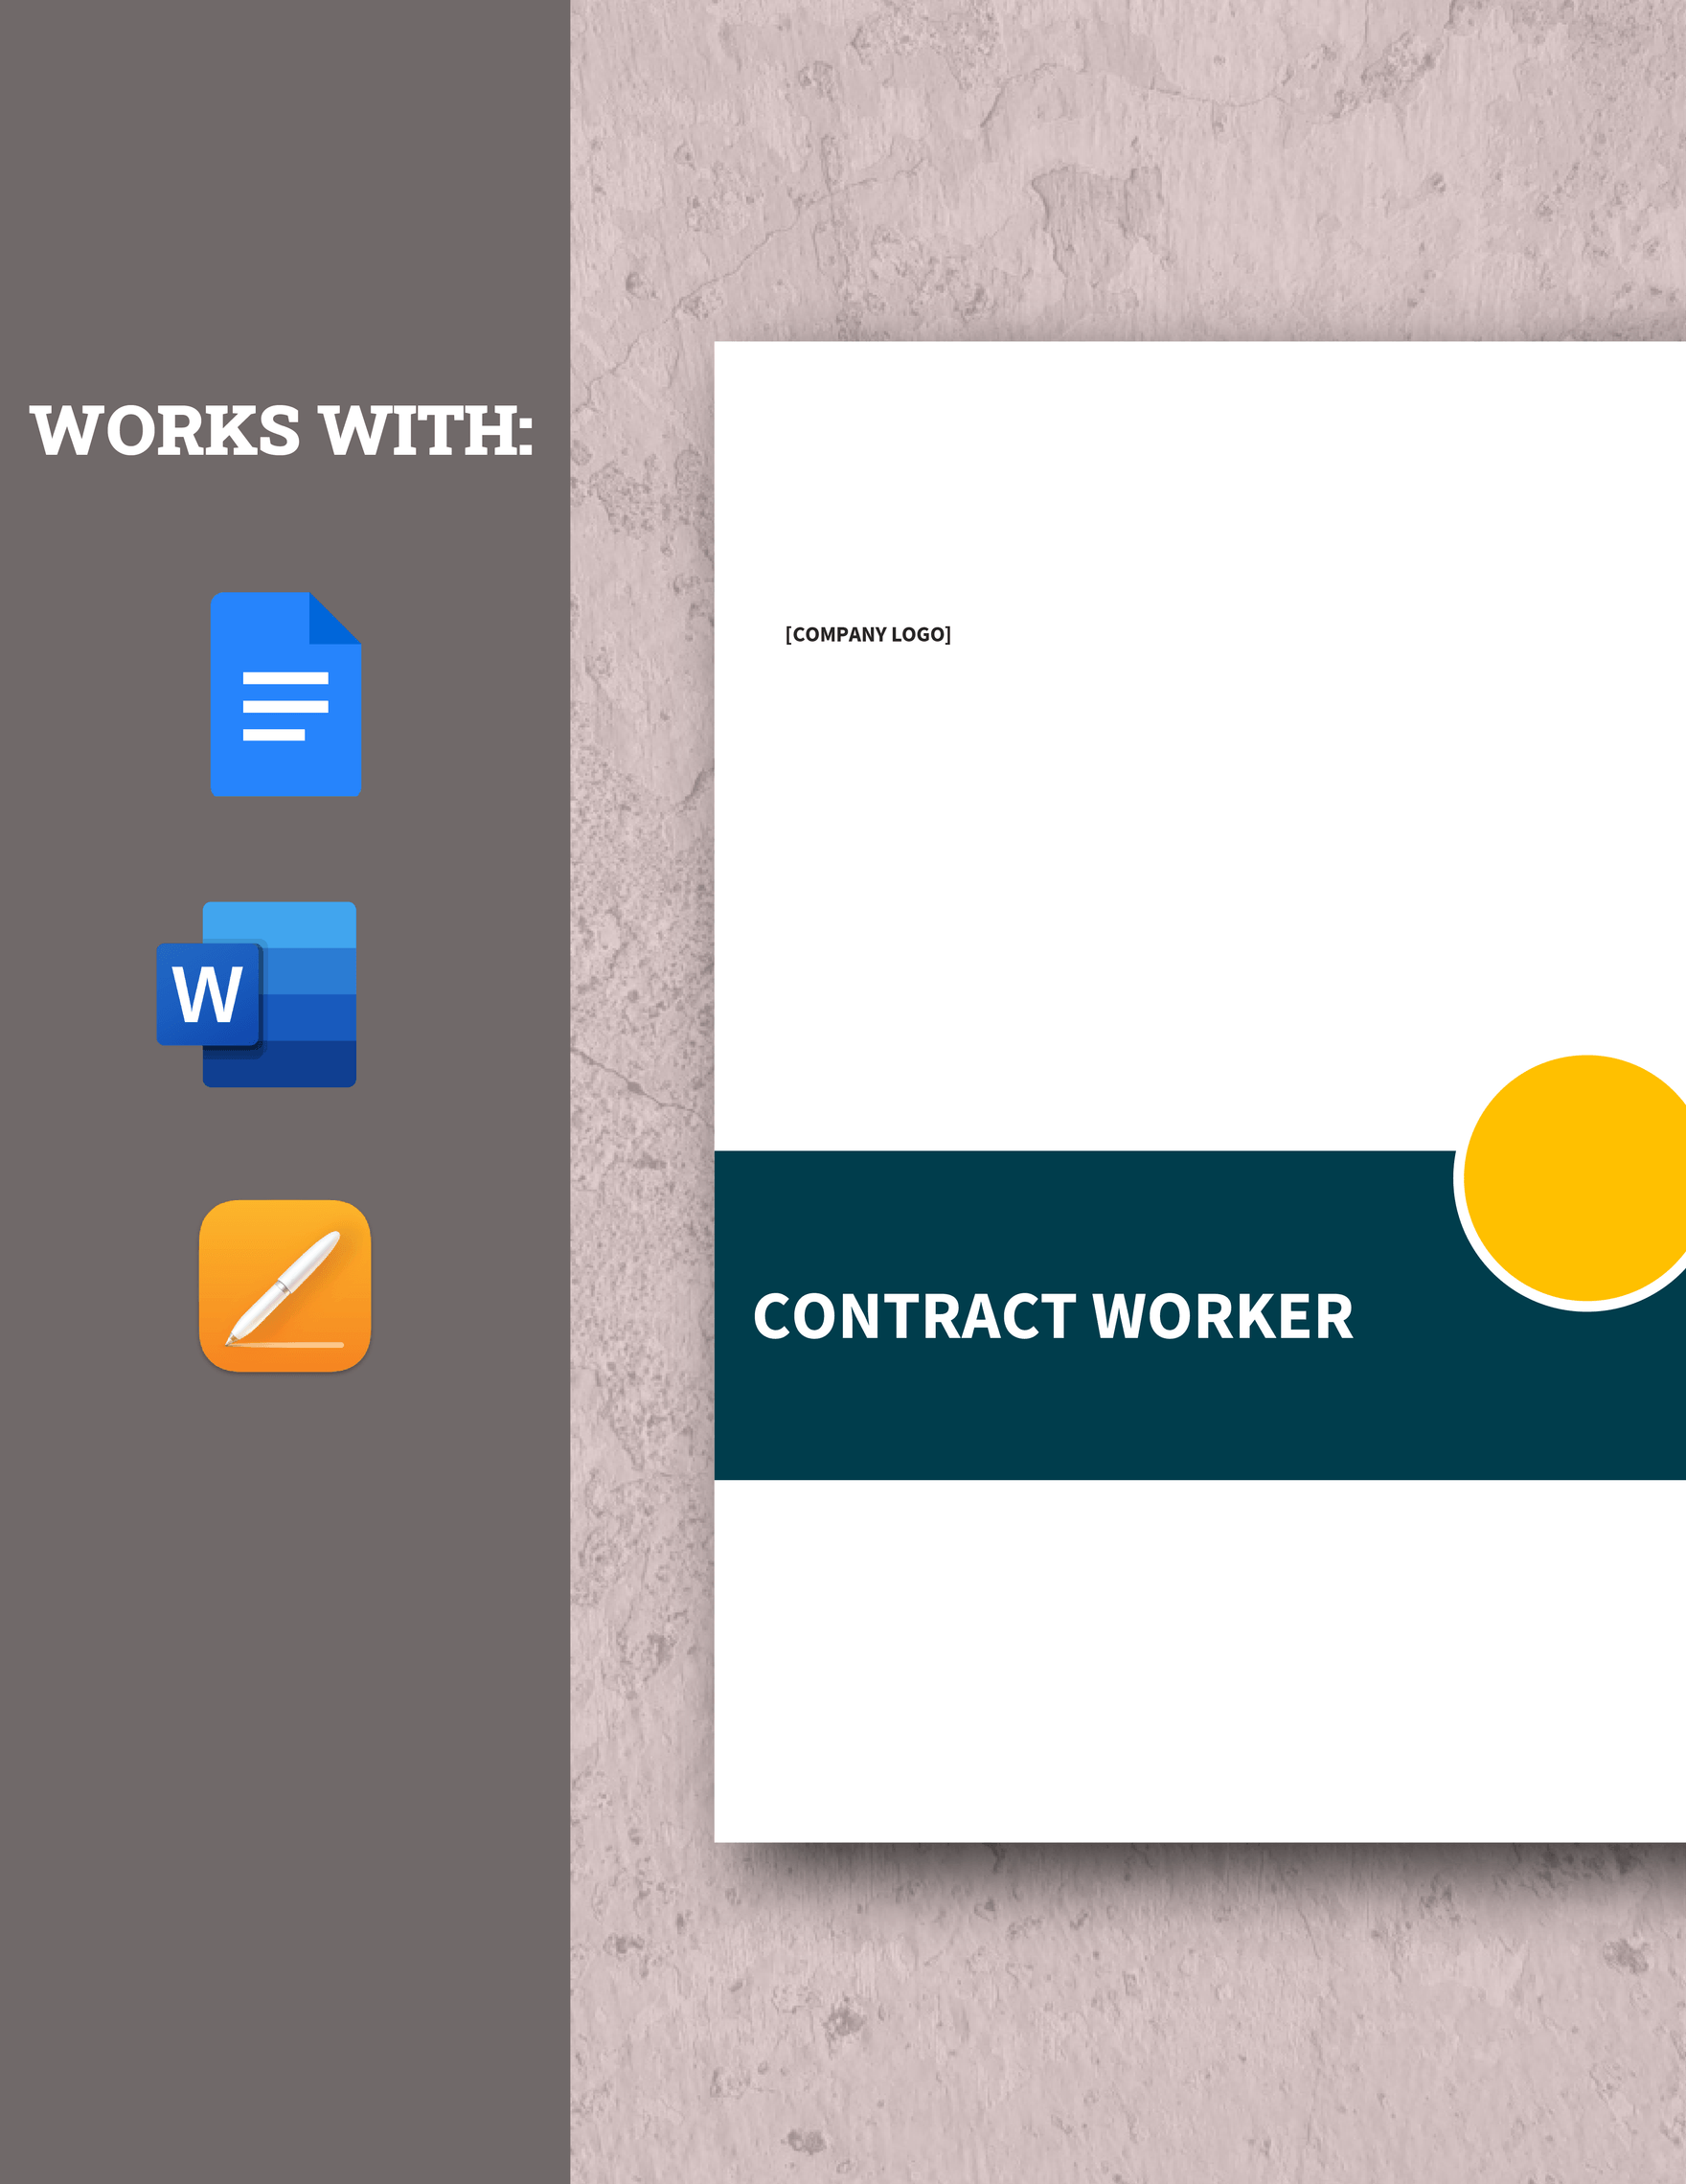 Contract Worker Contract Template